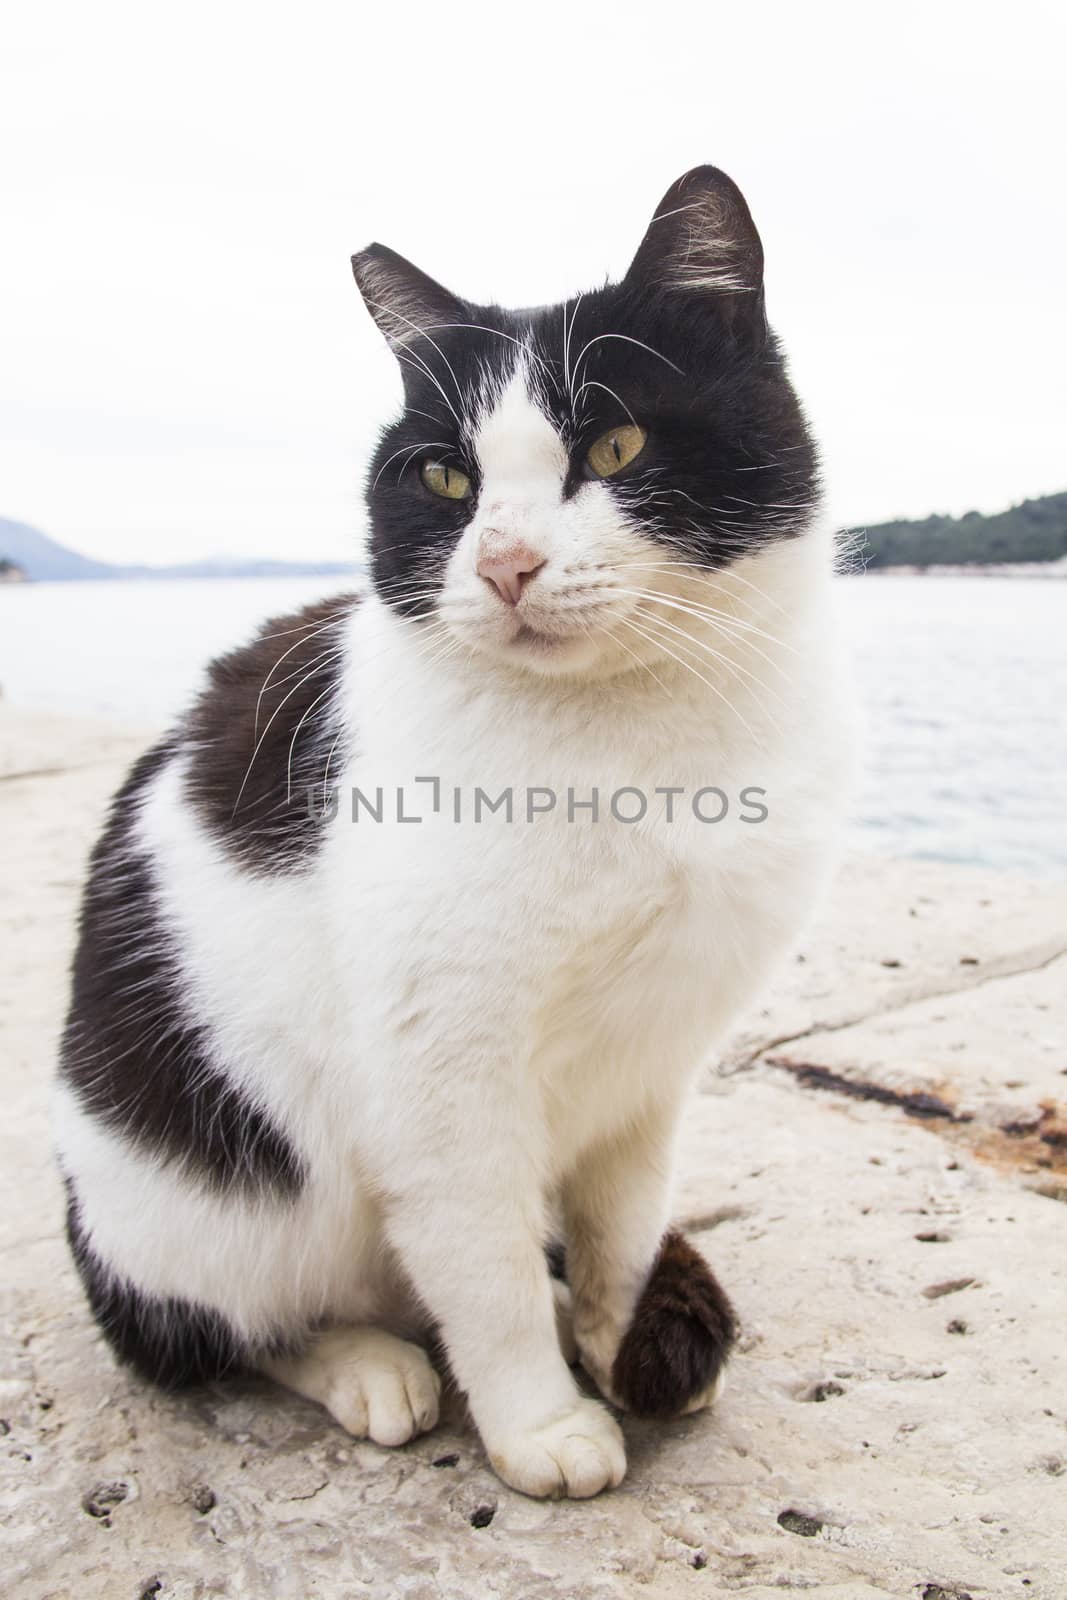 Cat by the sea by Aarstudio